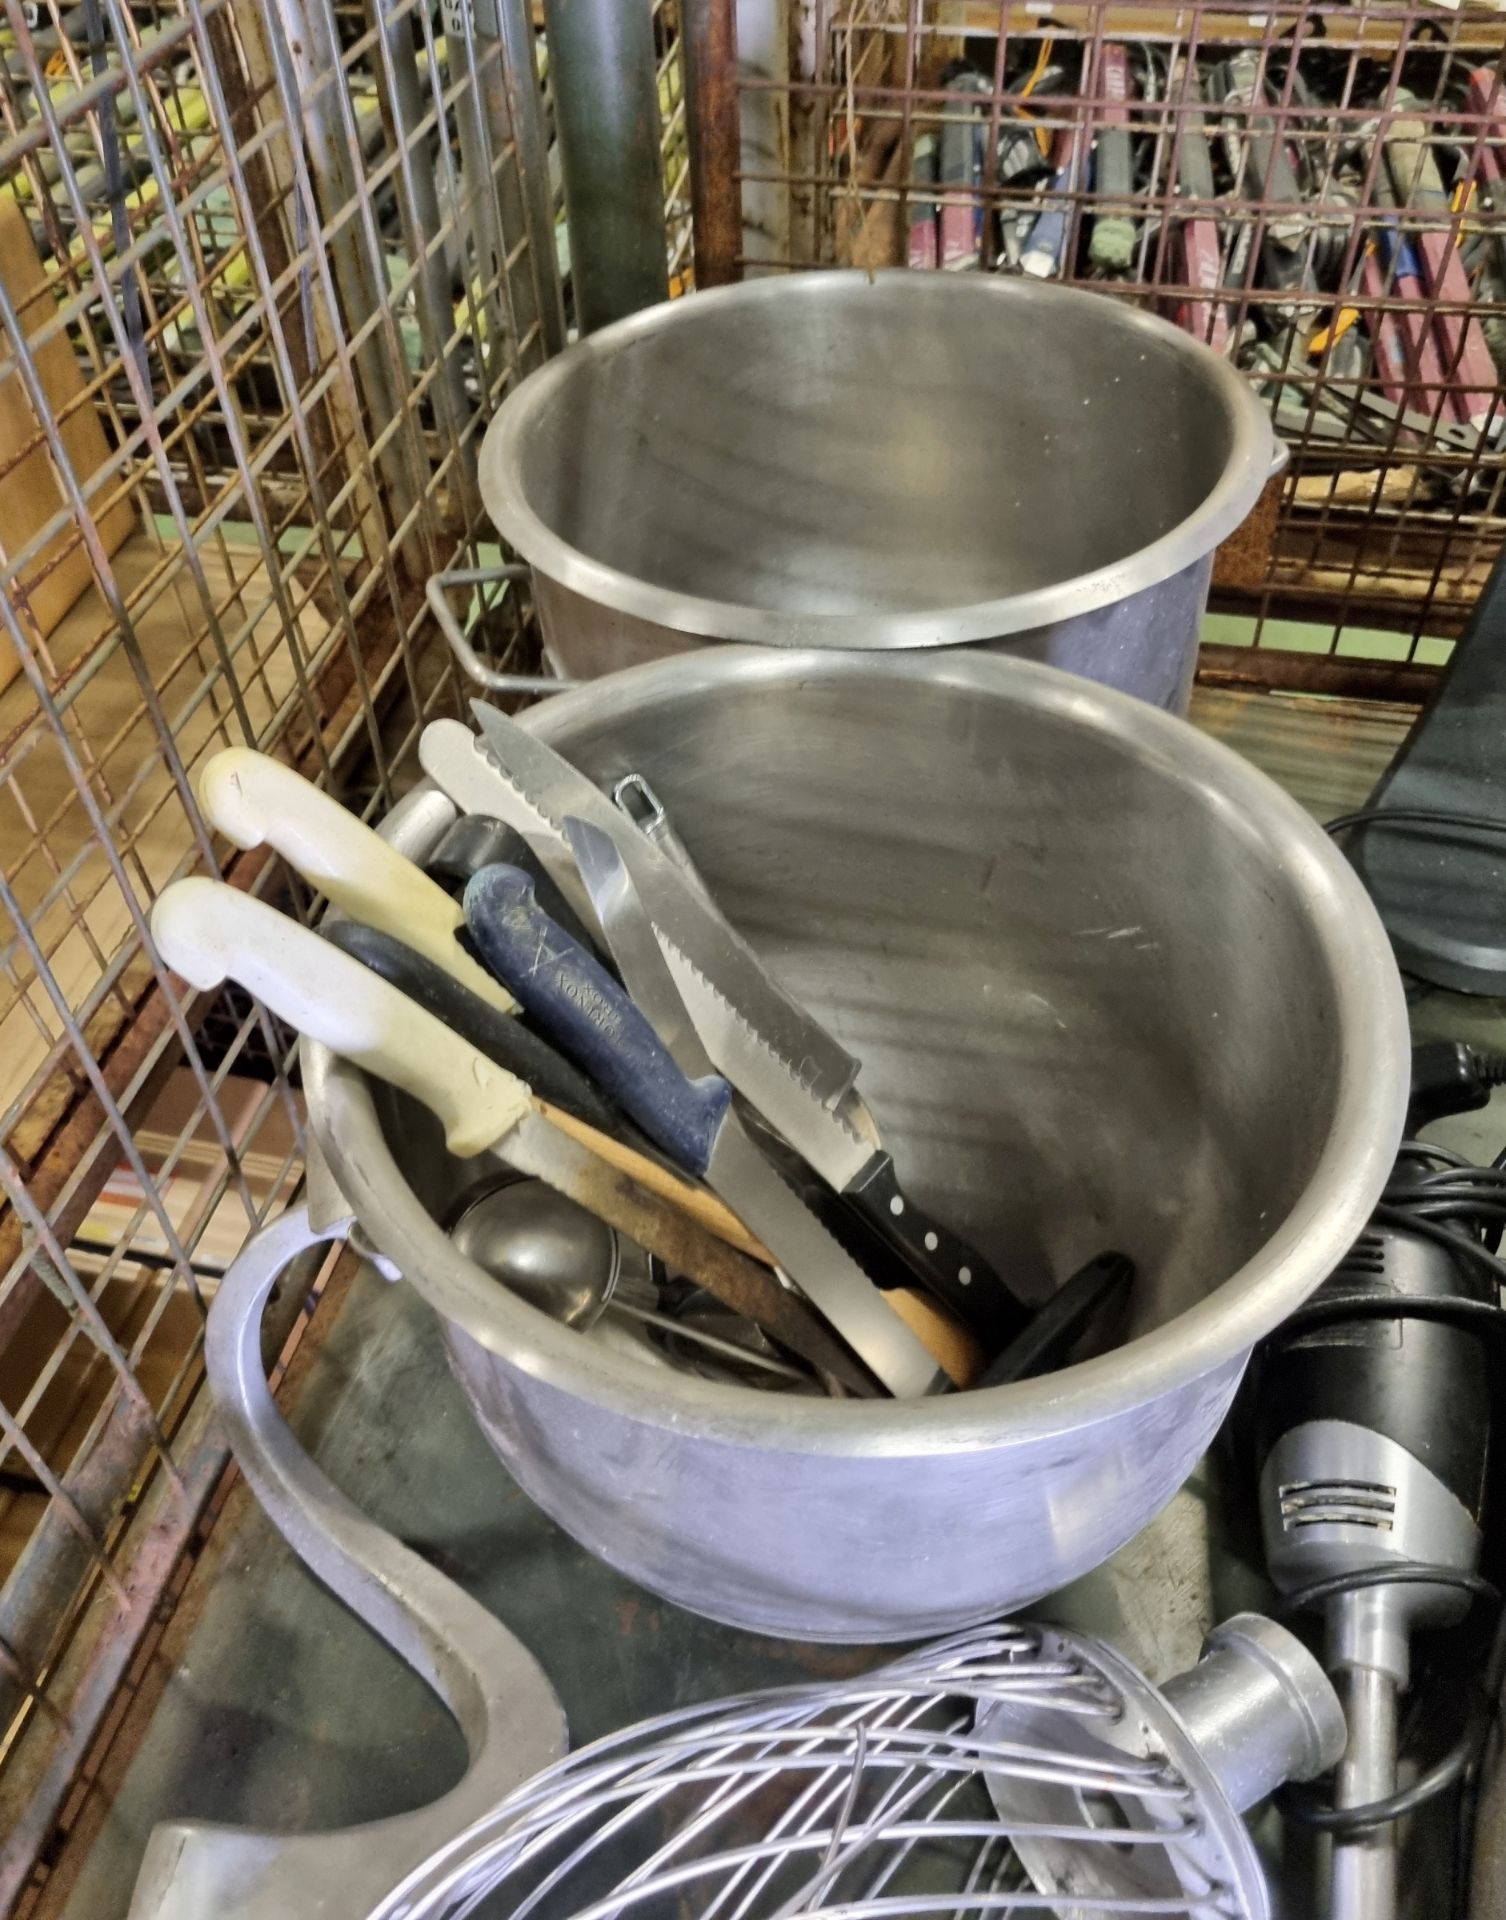 Catering equipment - mixing bowls, mixing attachments, milkshake machines and gastronorm pan lids - Image 5 of 6